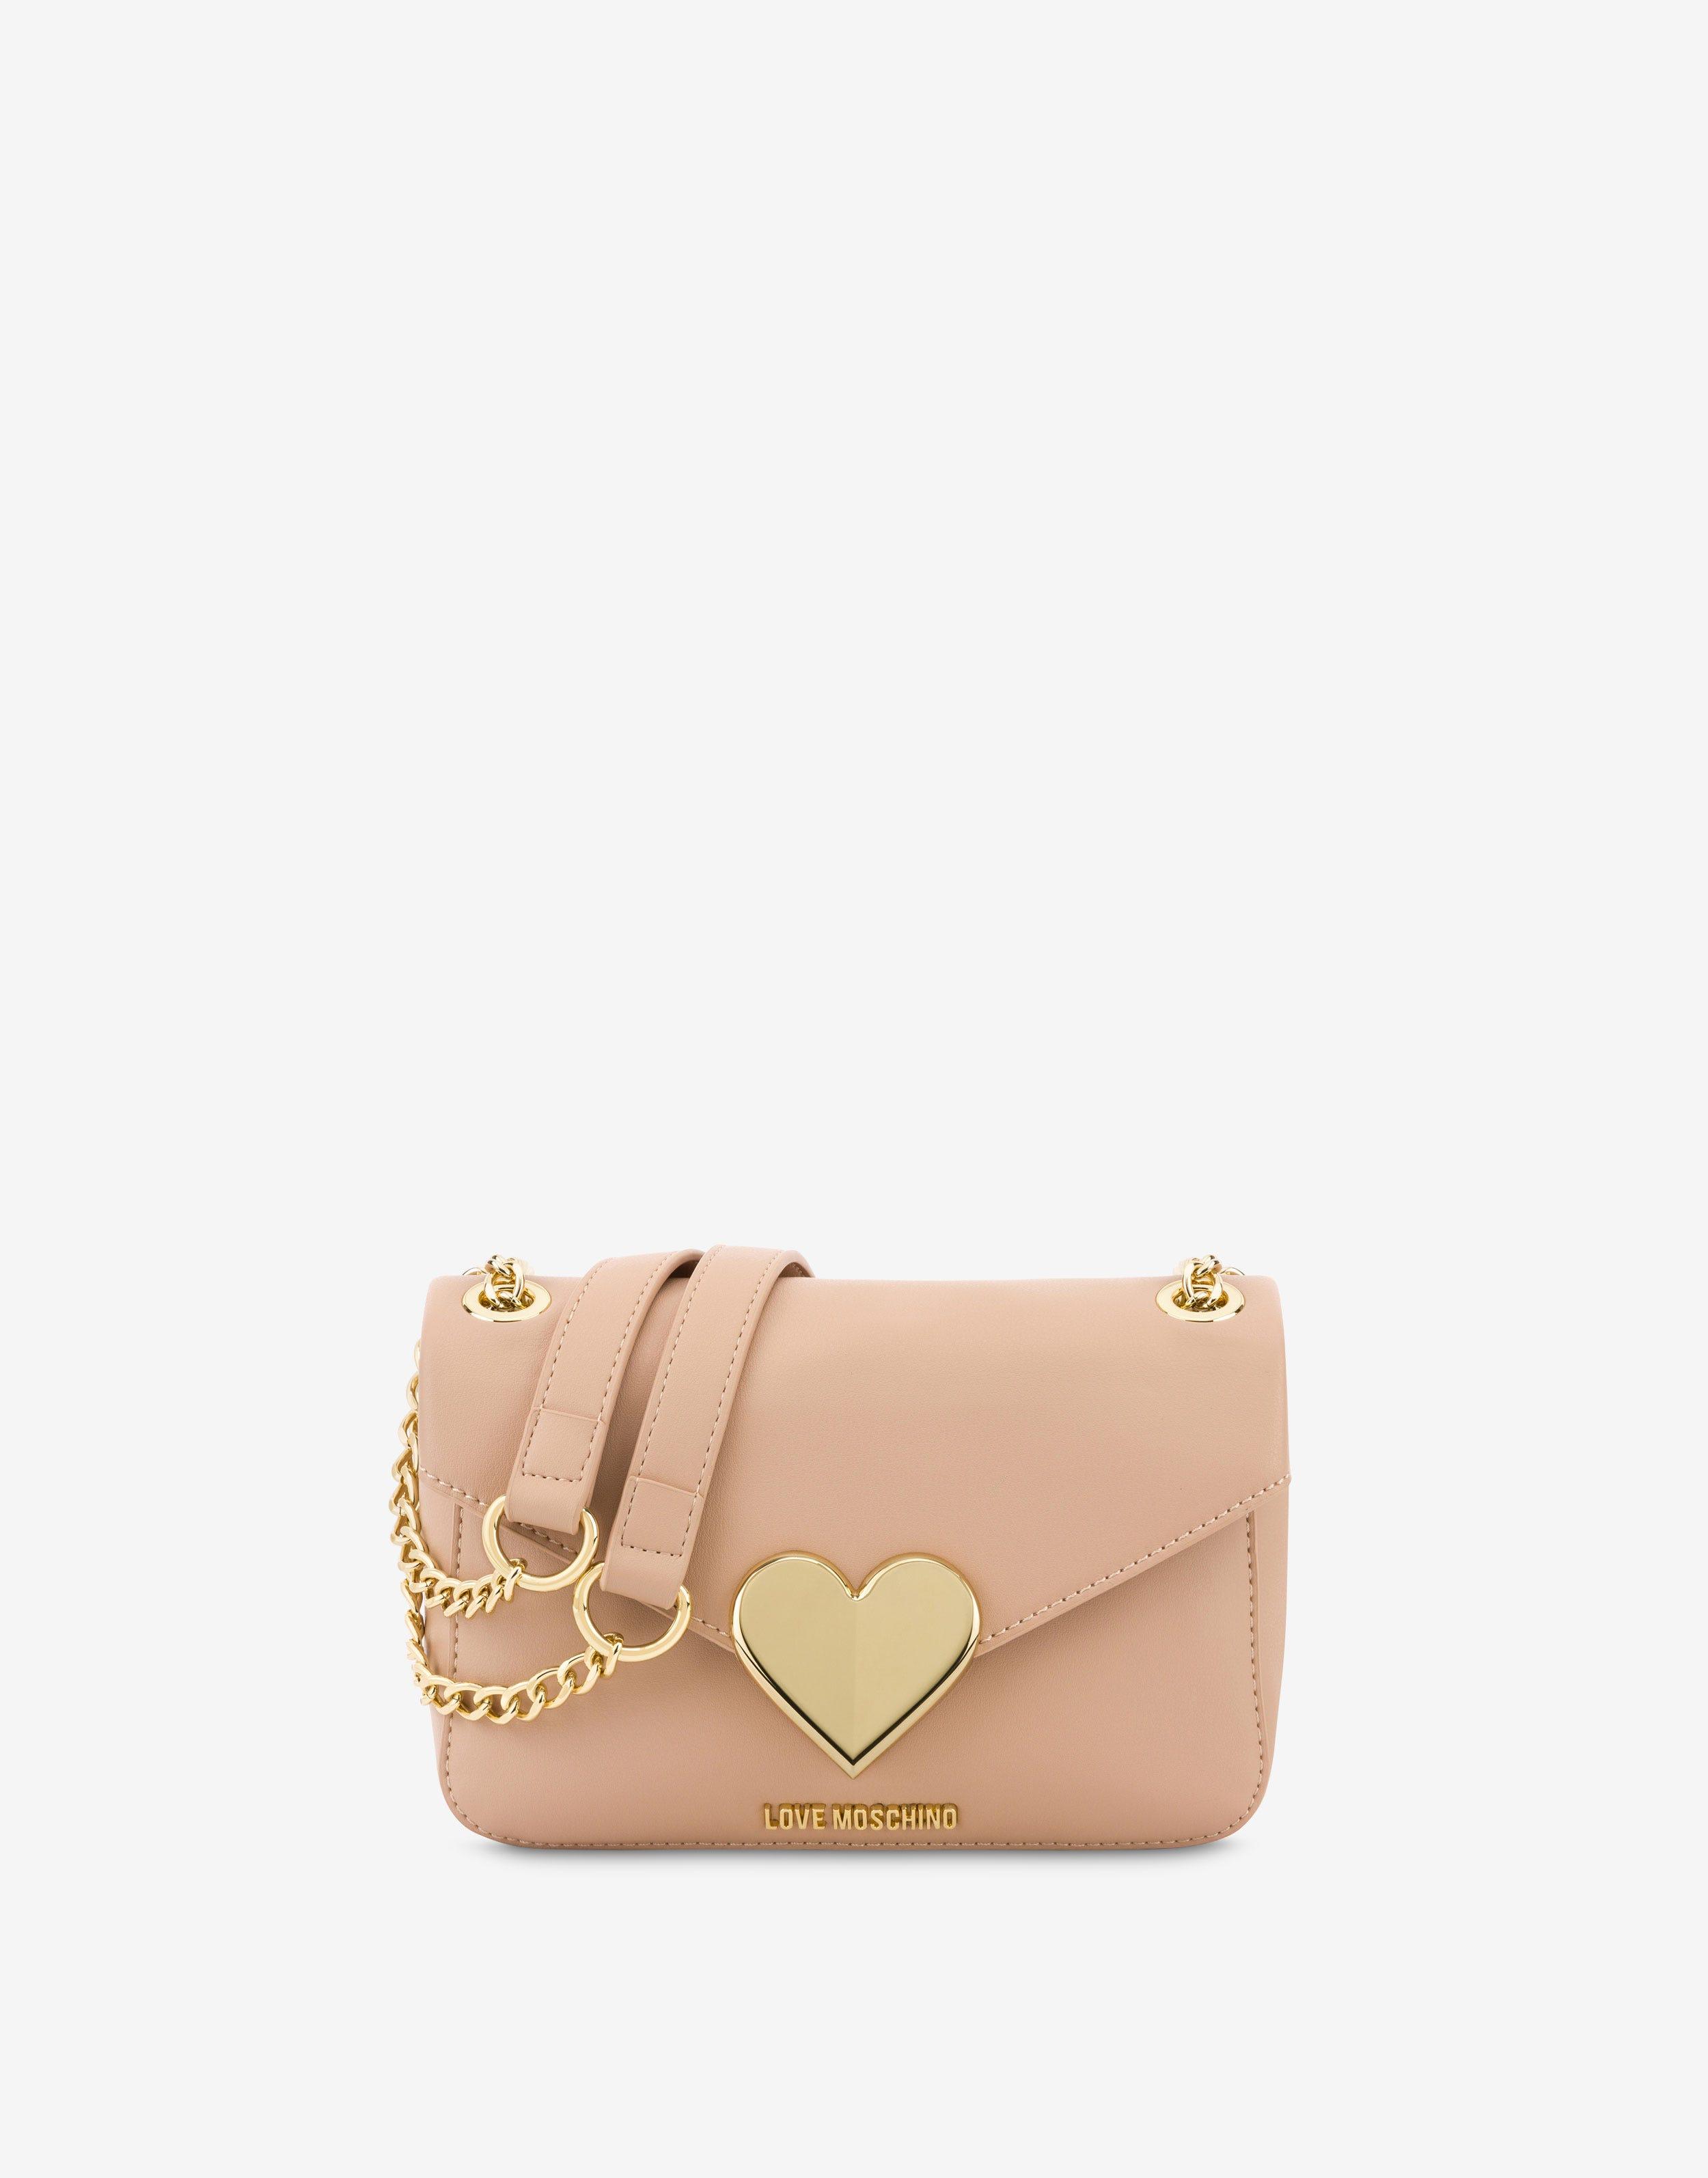 Moschino Gracious Eco-friendly Shoulder Bag in Natural | Lyst UK